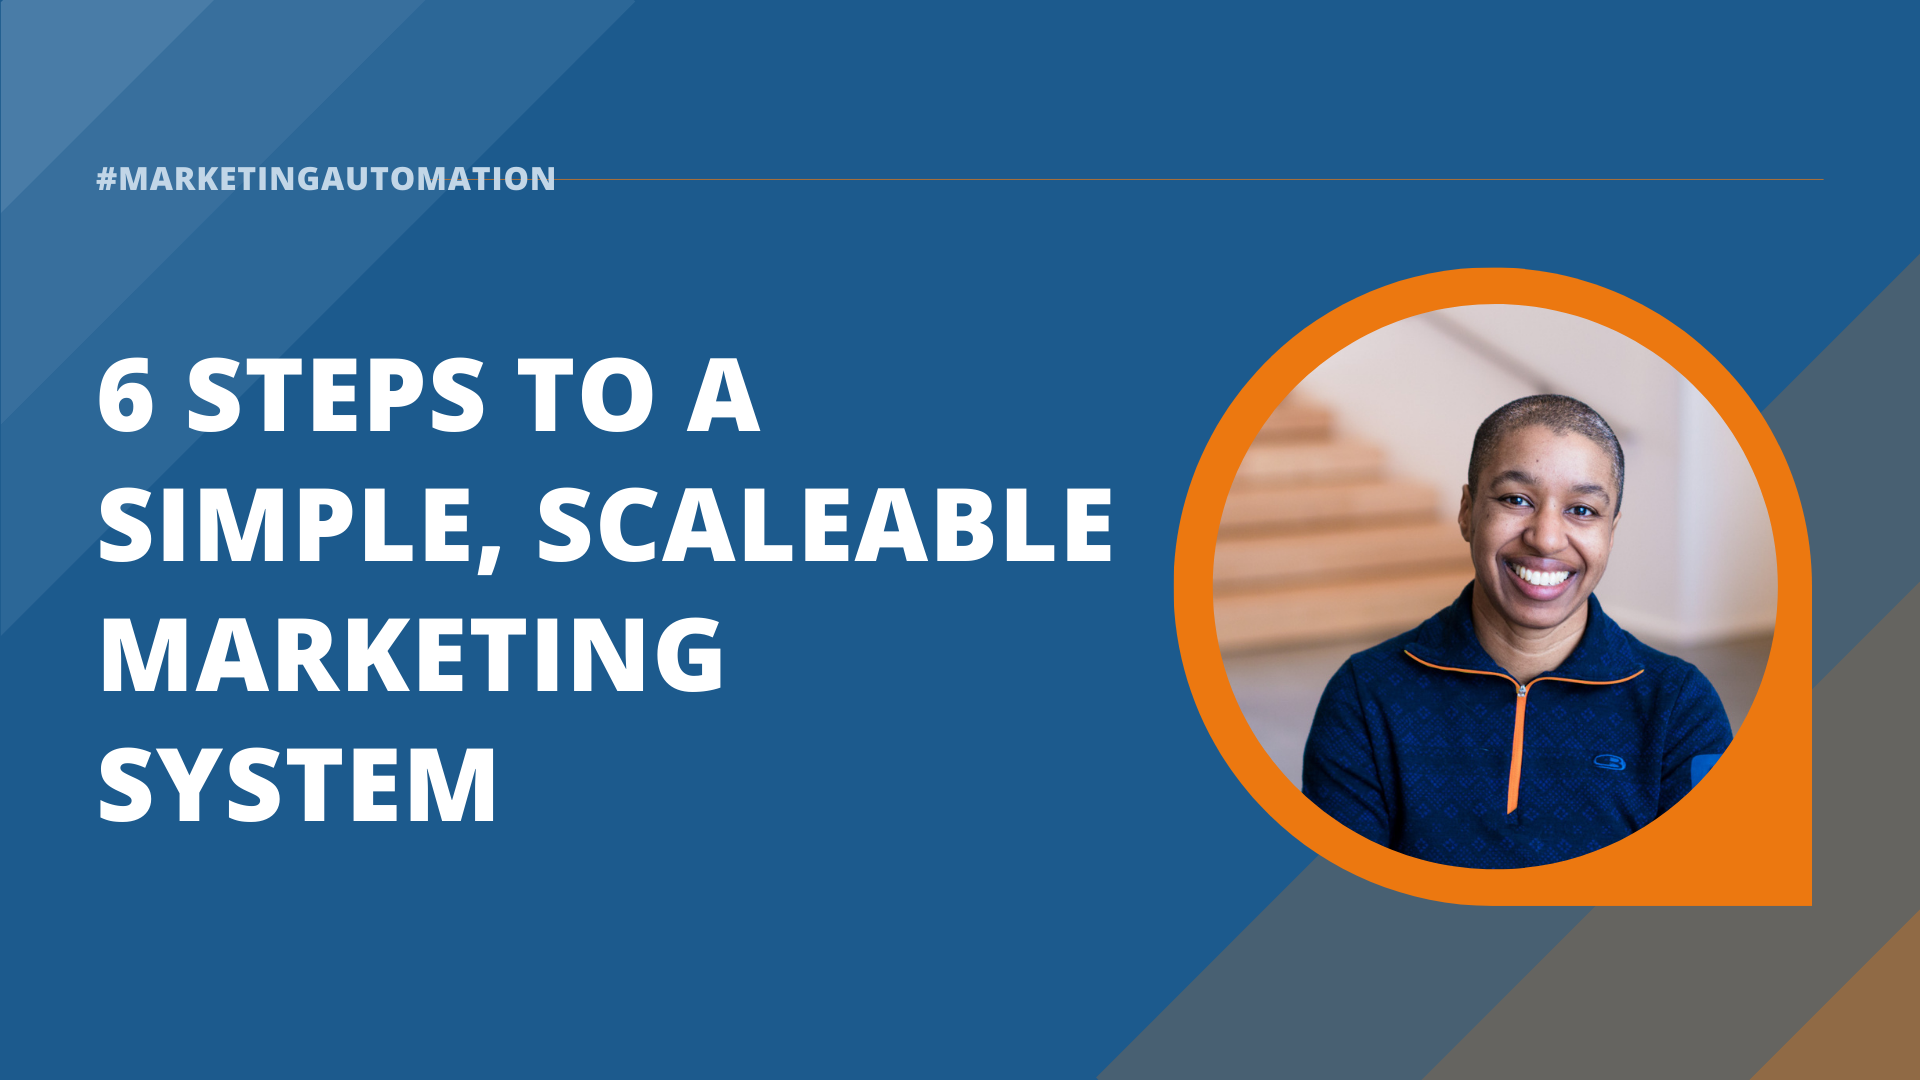 6 Steps to create a simple scaleable marketing system